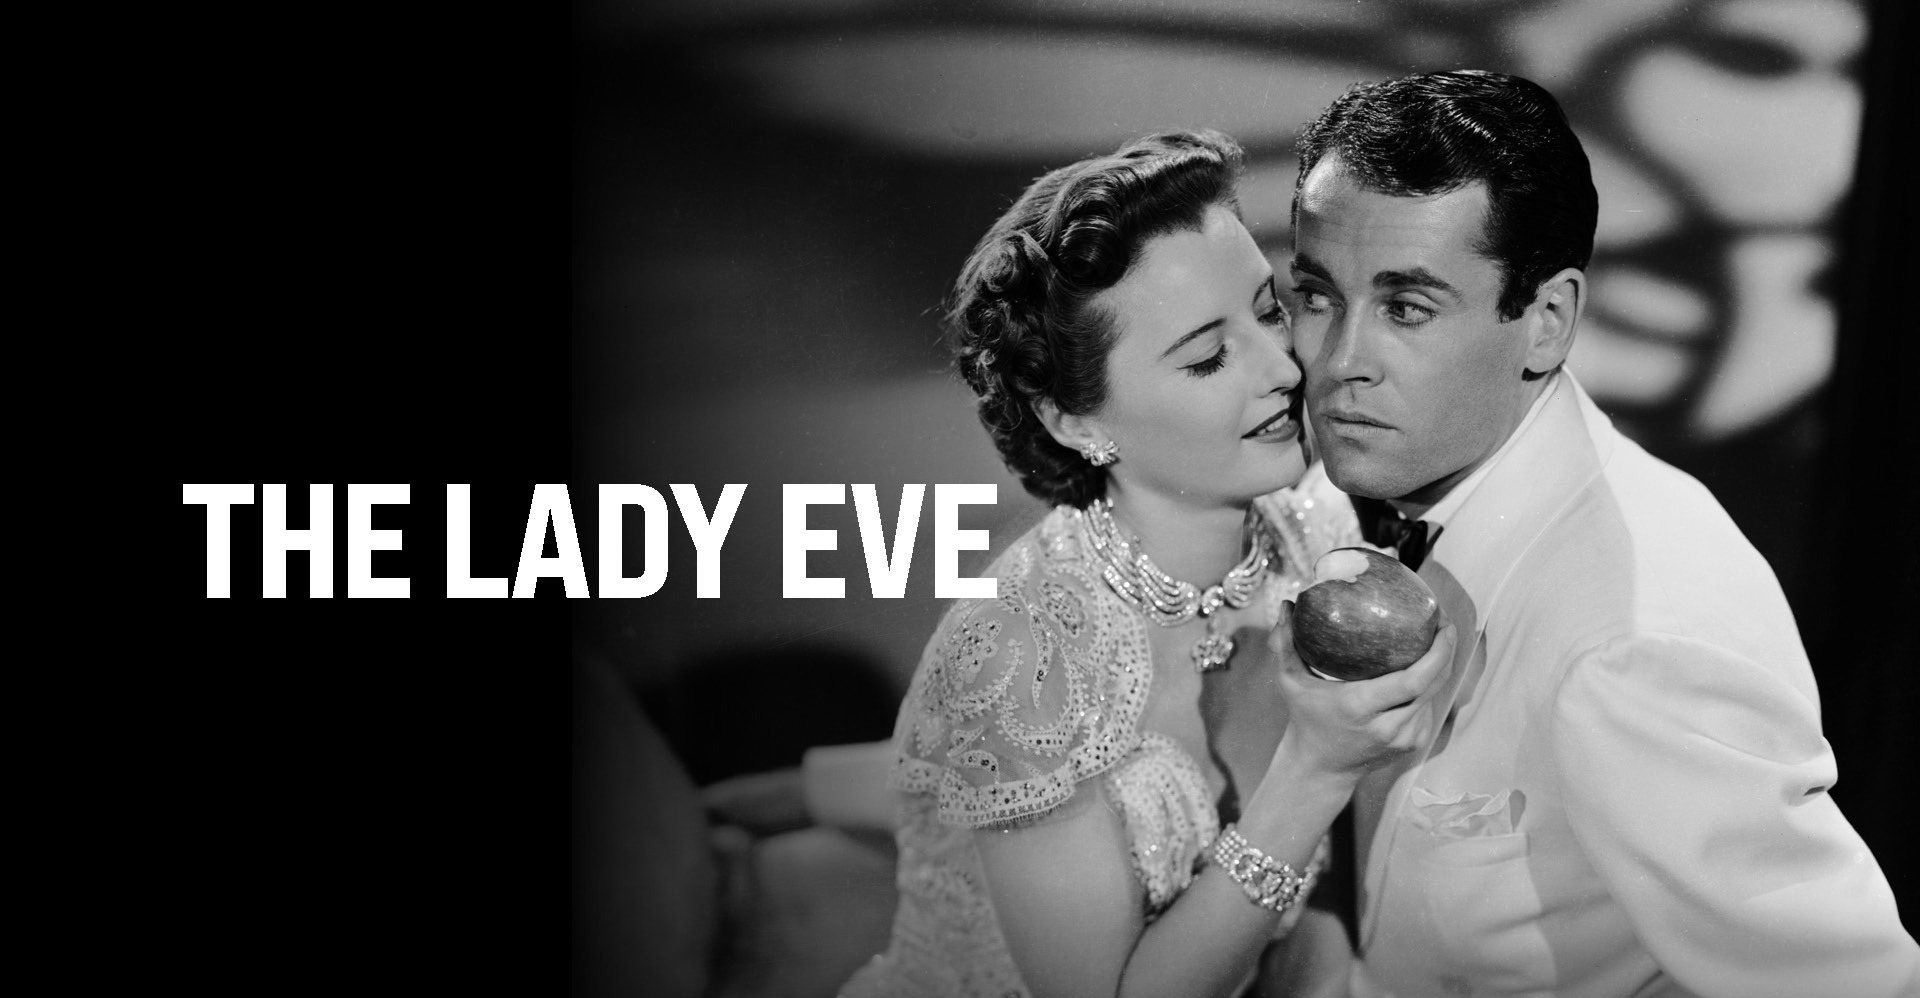 33 Facts about the movie The Lady Eve - Facts.net